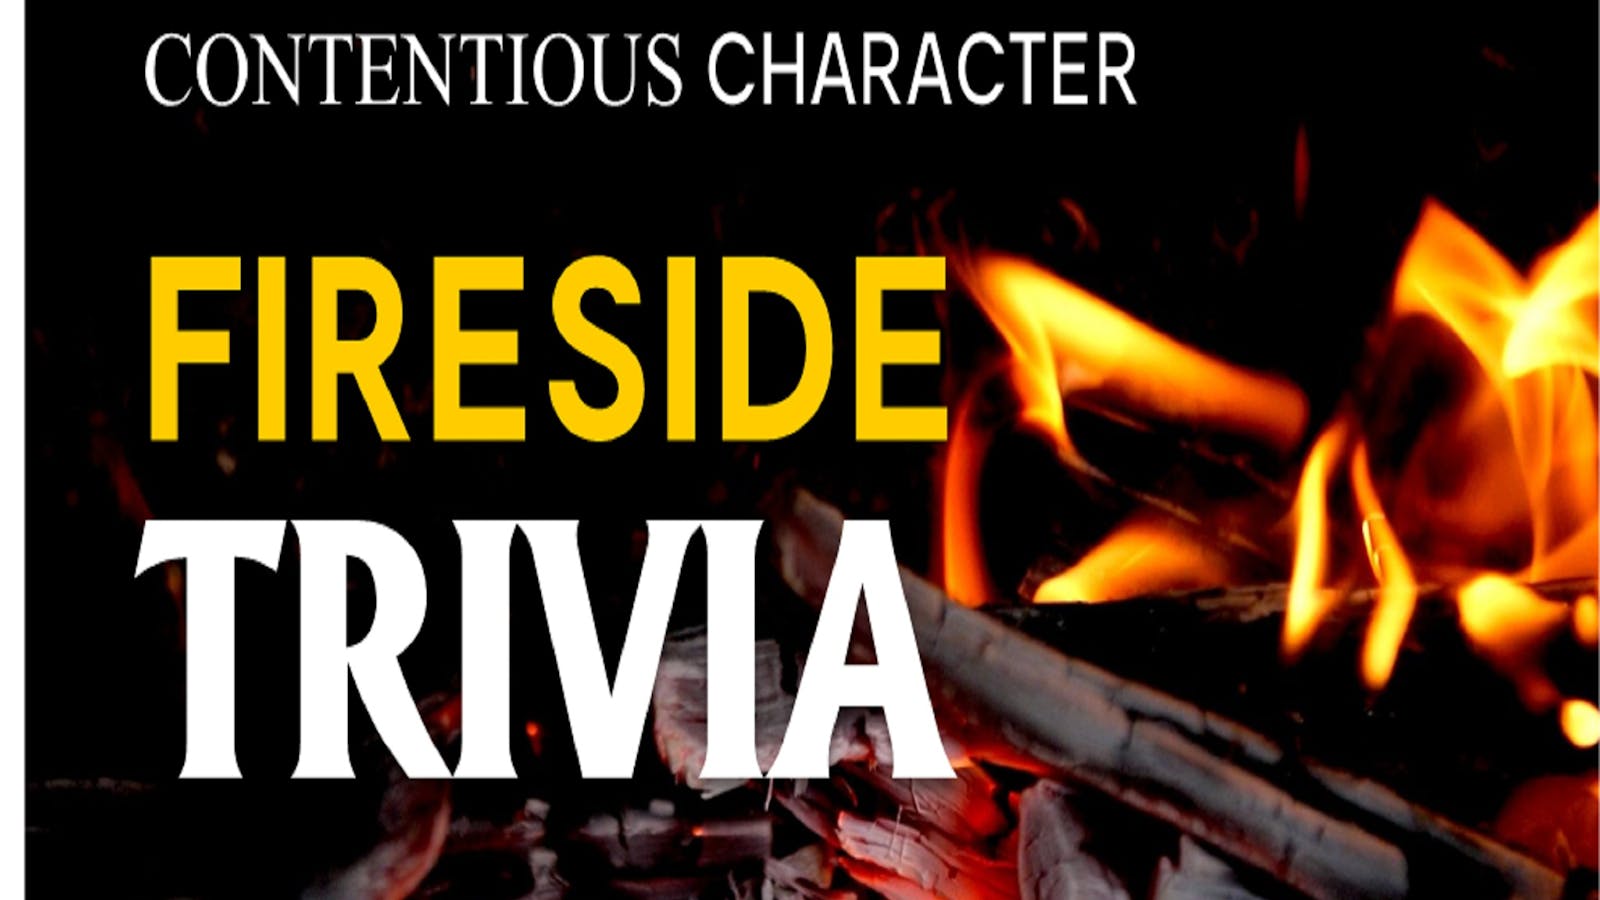 Image for Fireside Trivia  at Contentious Character